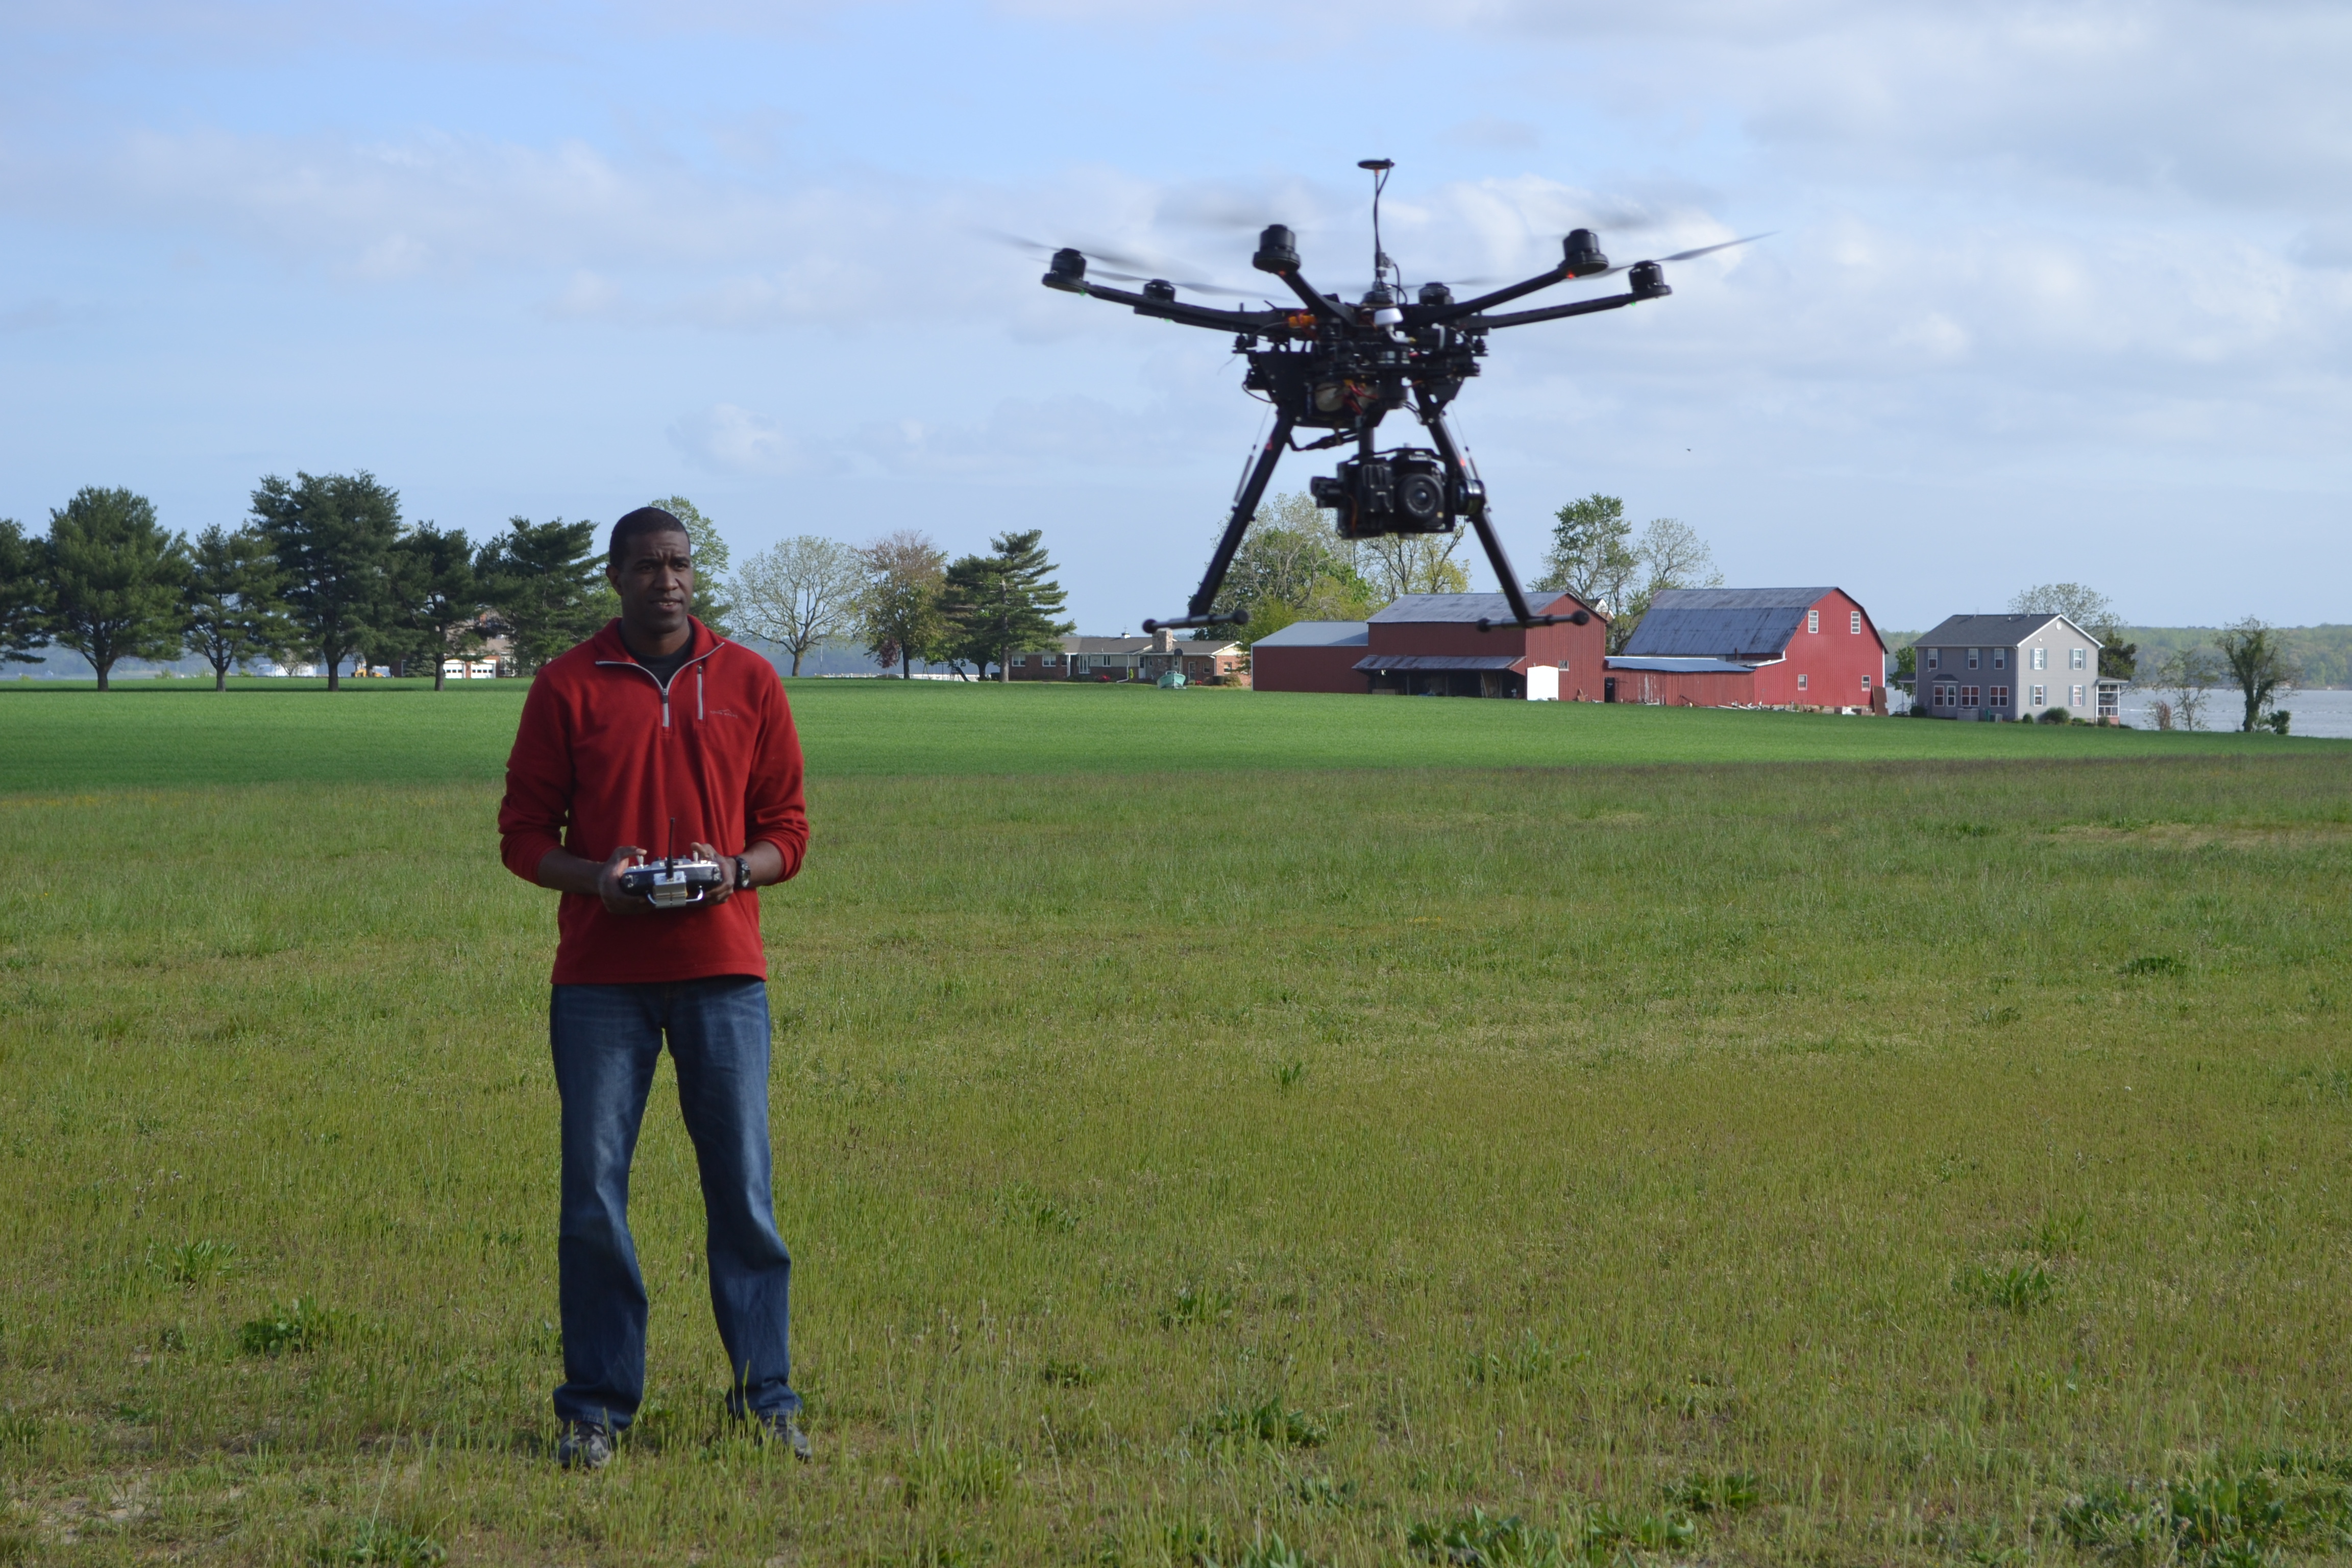 Review: DJI S800 Spreading Wings Hexacopter